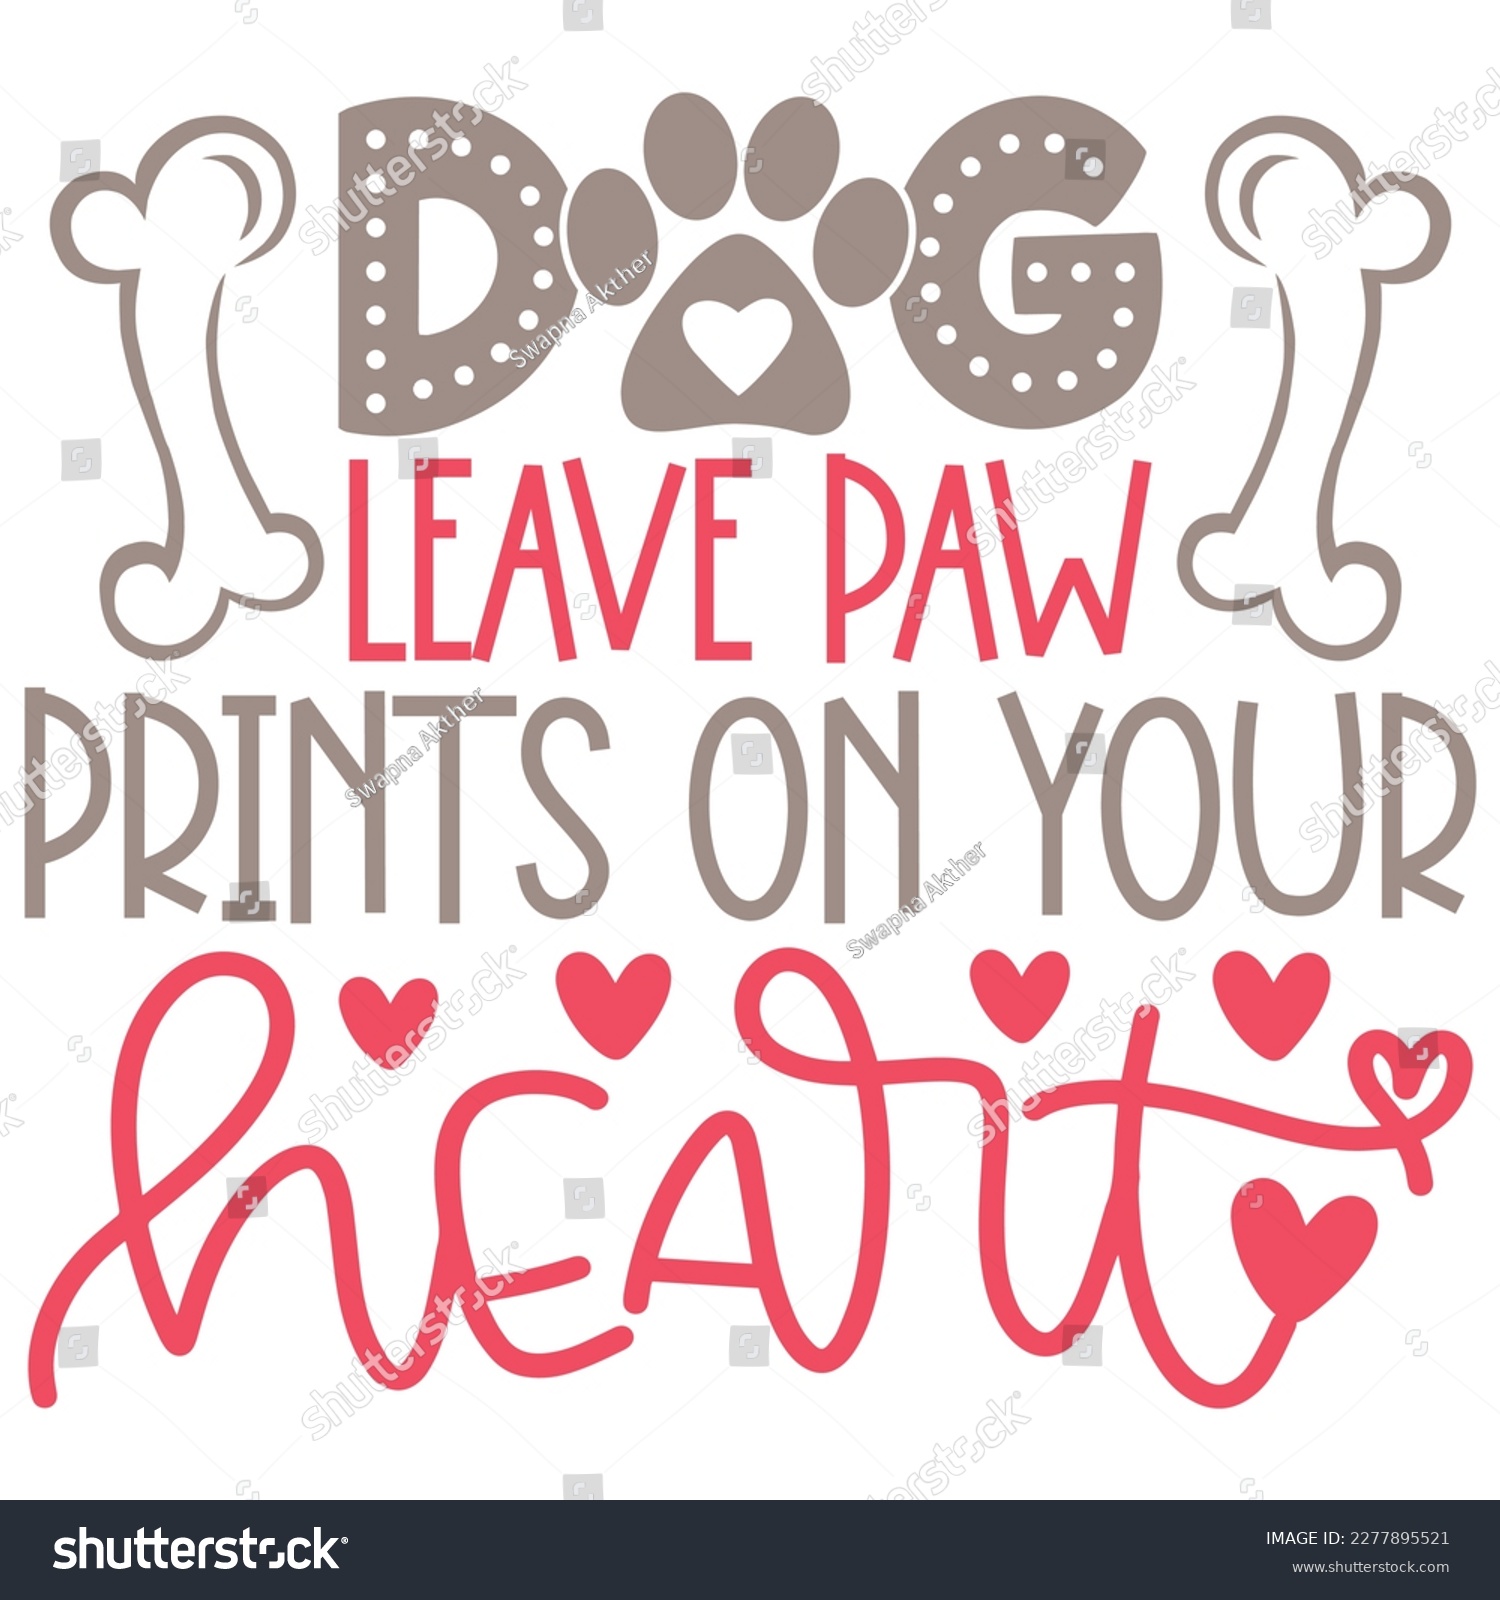 SVG of Dogs Leave Paw Prints On Your Heart - Boho Retro Style Dog T-shirt And SVG Design. Dog SVG Quotes T shirt Design, Vector EPS Editable Files, Can You Download This  svg